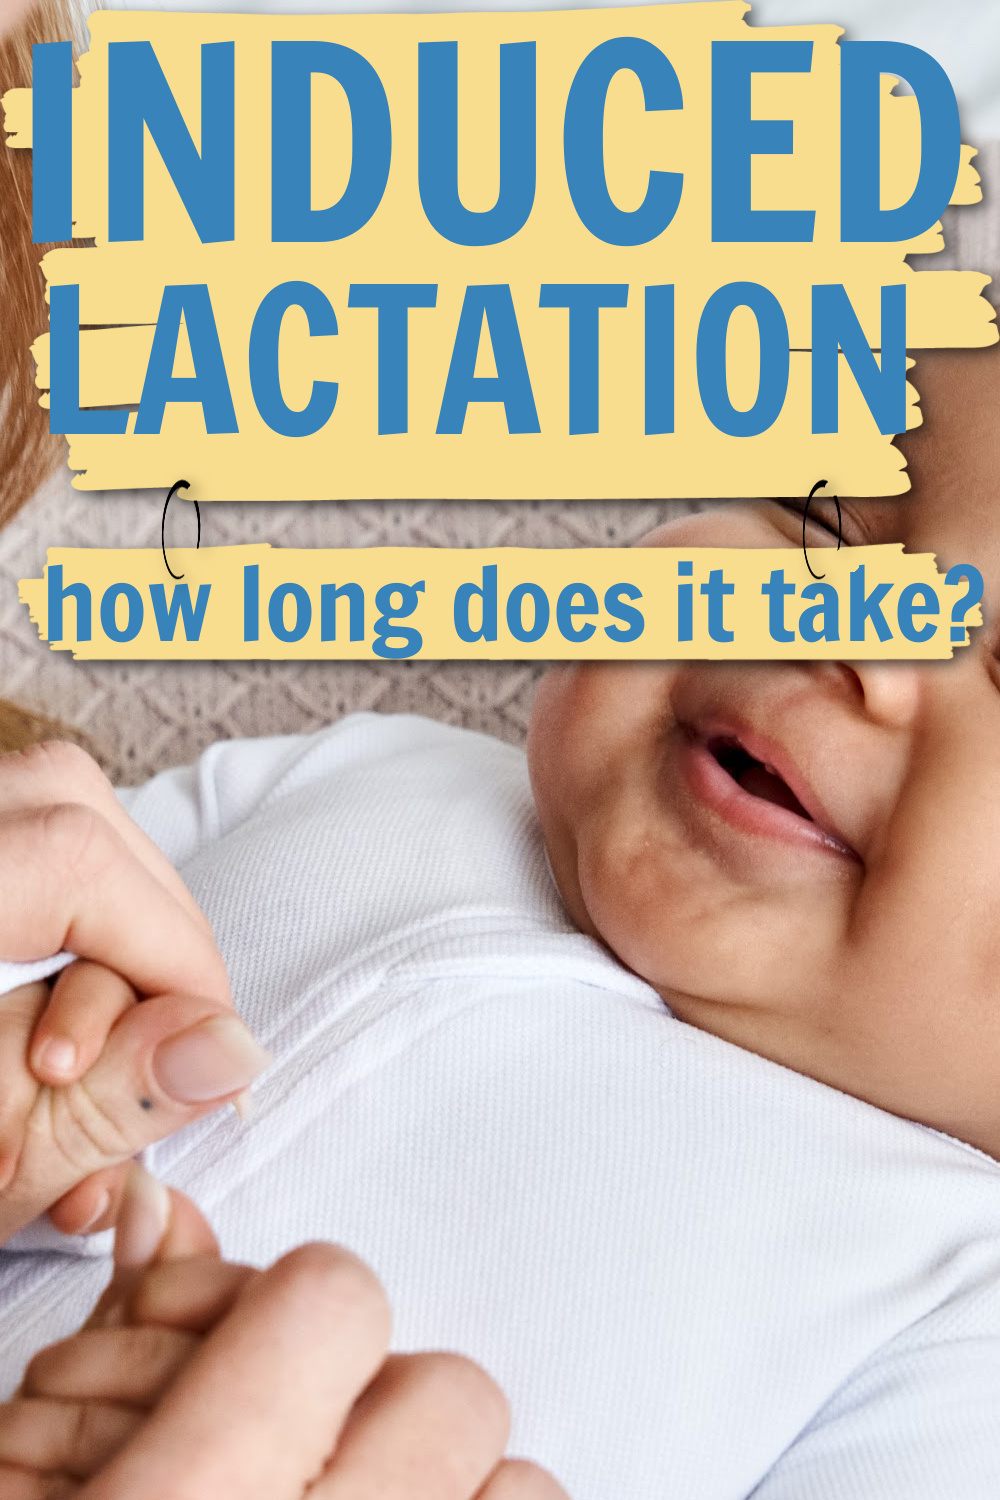 how long does it take to induce lactation without pregnancy